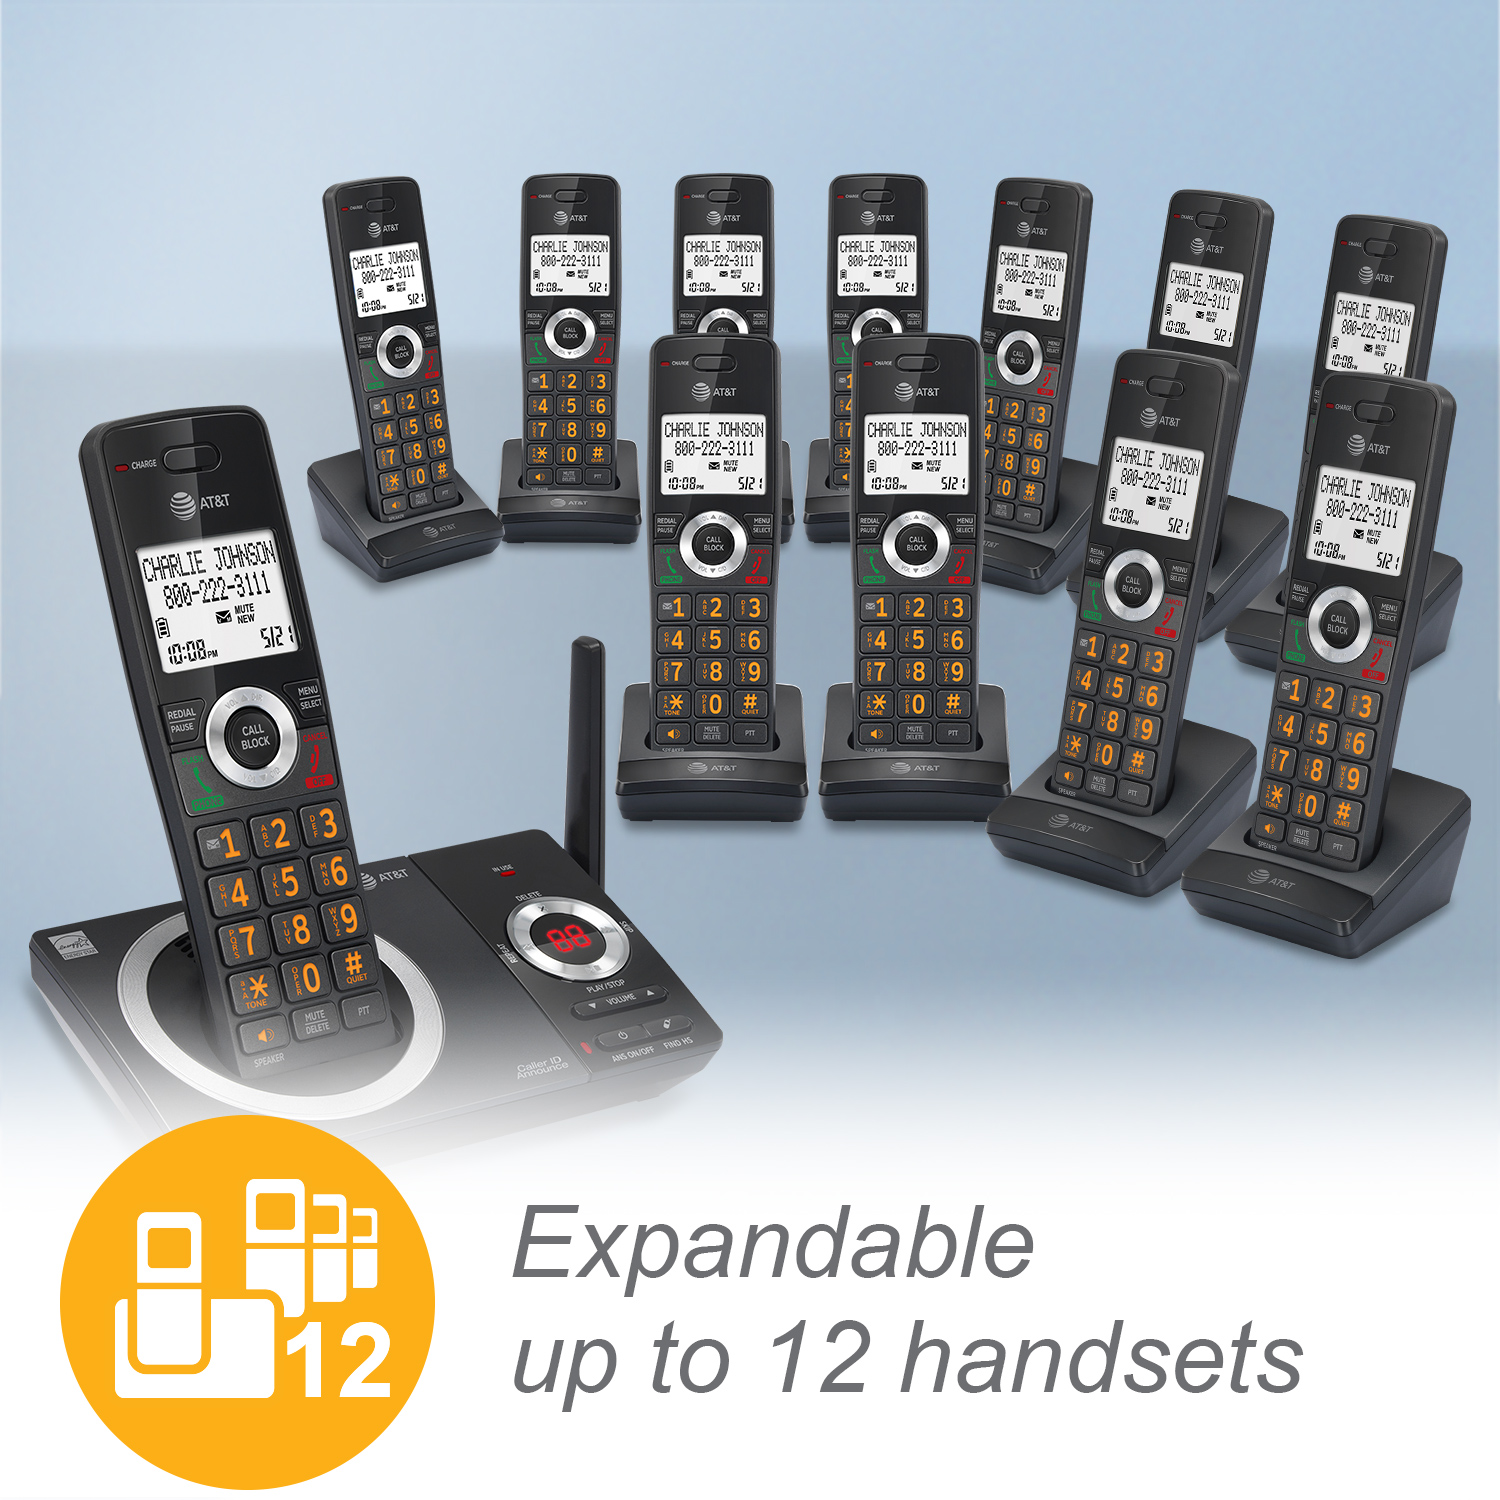 2-Handset Expandable Cordless Phone with Unsurpassed Range, Smart Call Blocker and Answering System - view 5